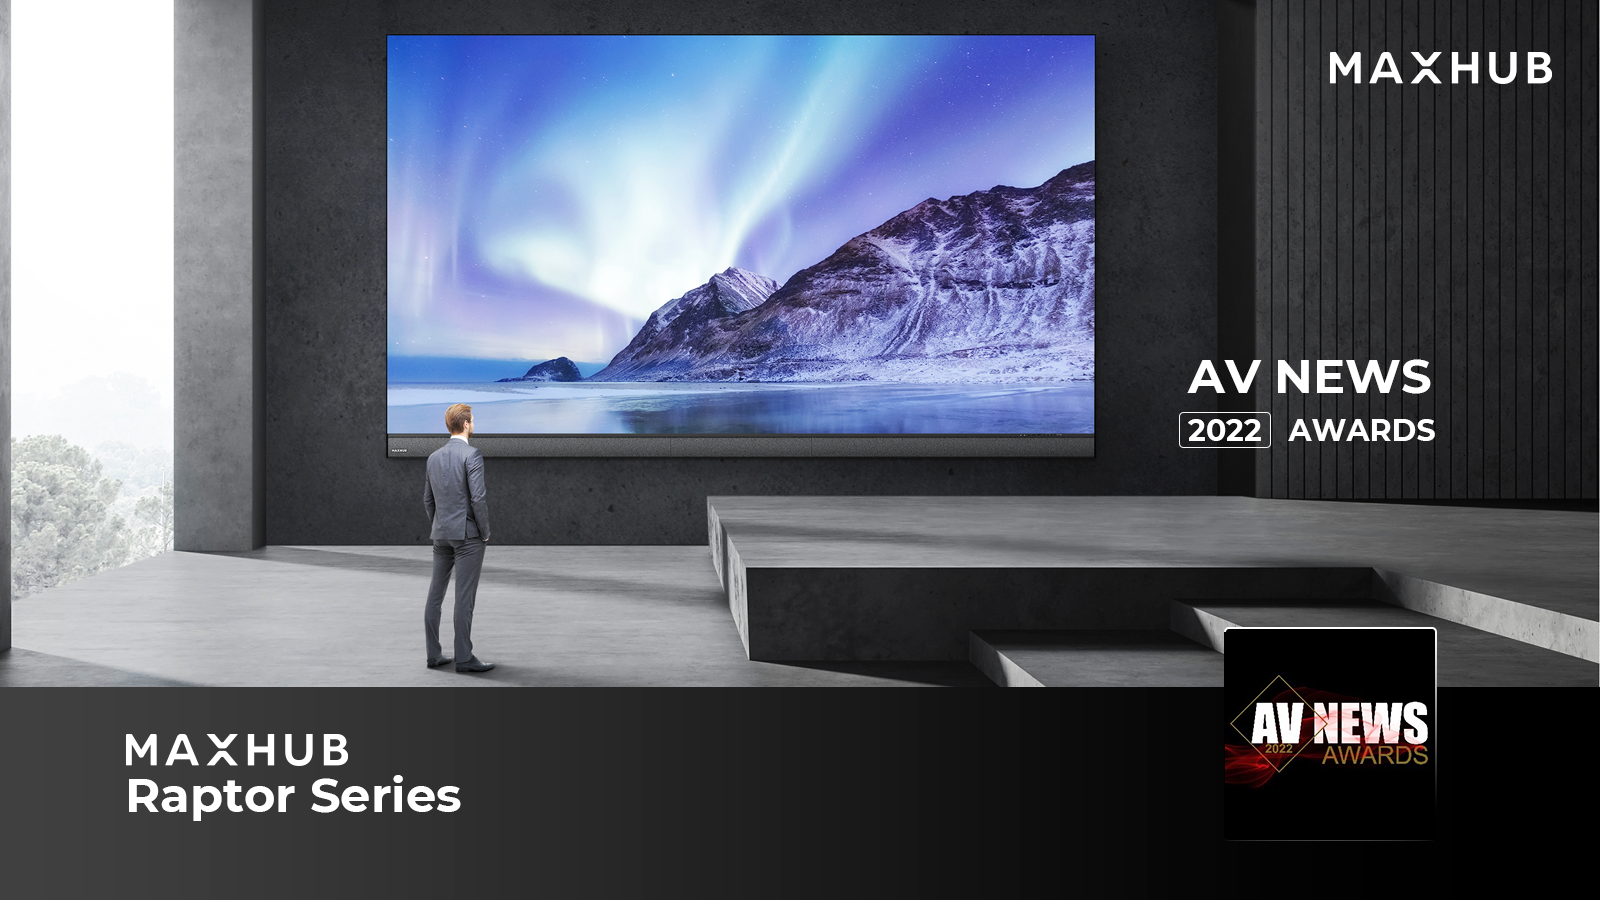 MAXHUB's all-in-one LED wall Raptor Series won the AV News awards at the ISE 2022